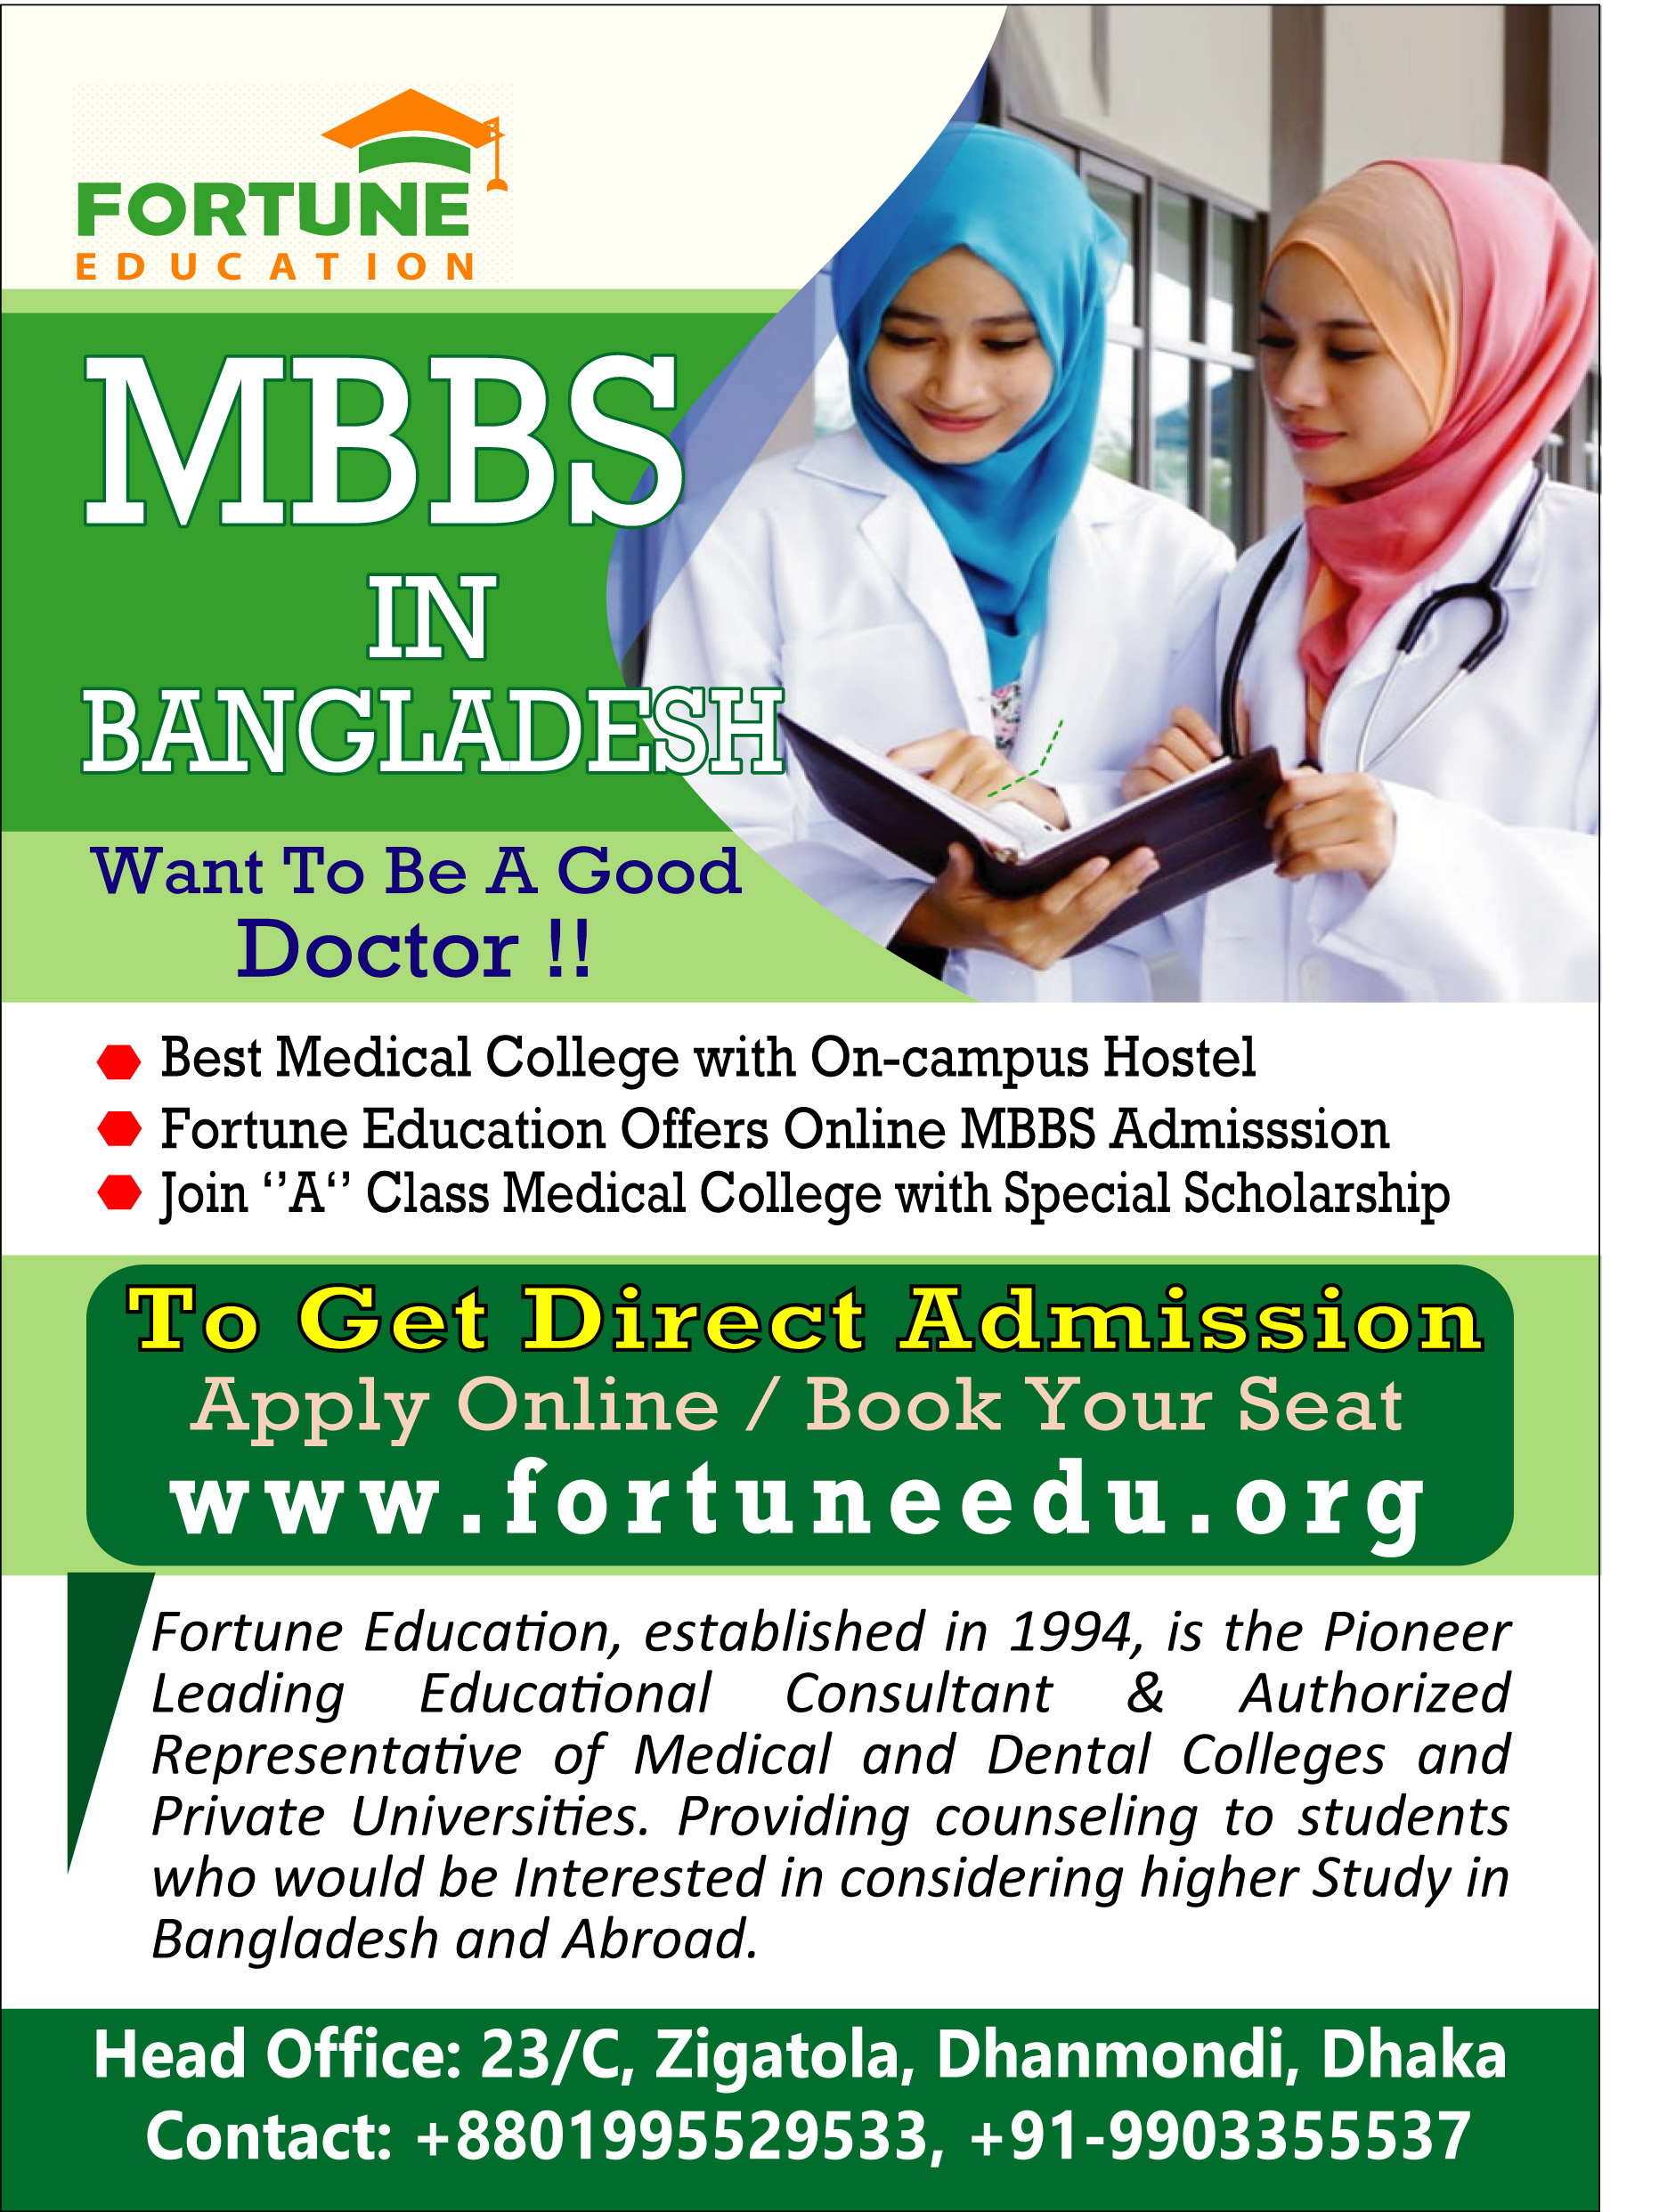 MBBS Admission in Bangladesh trough Fortune Education